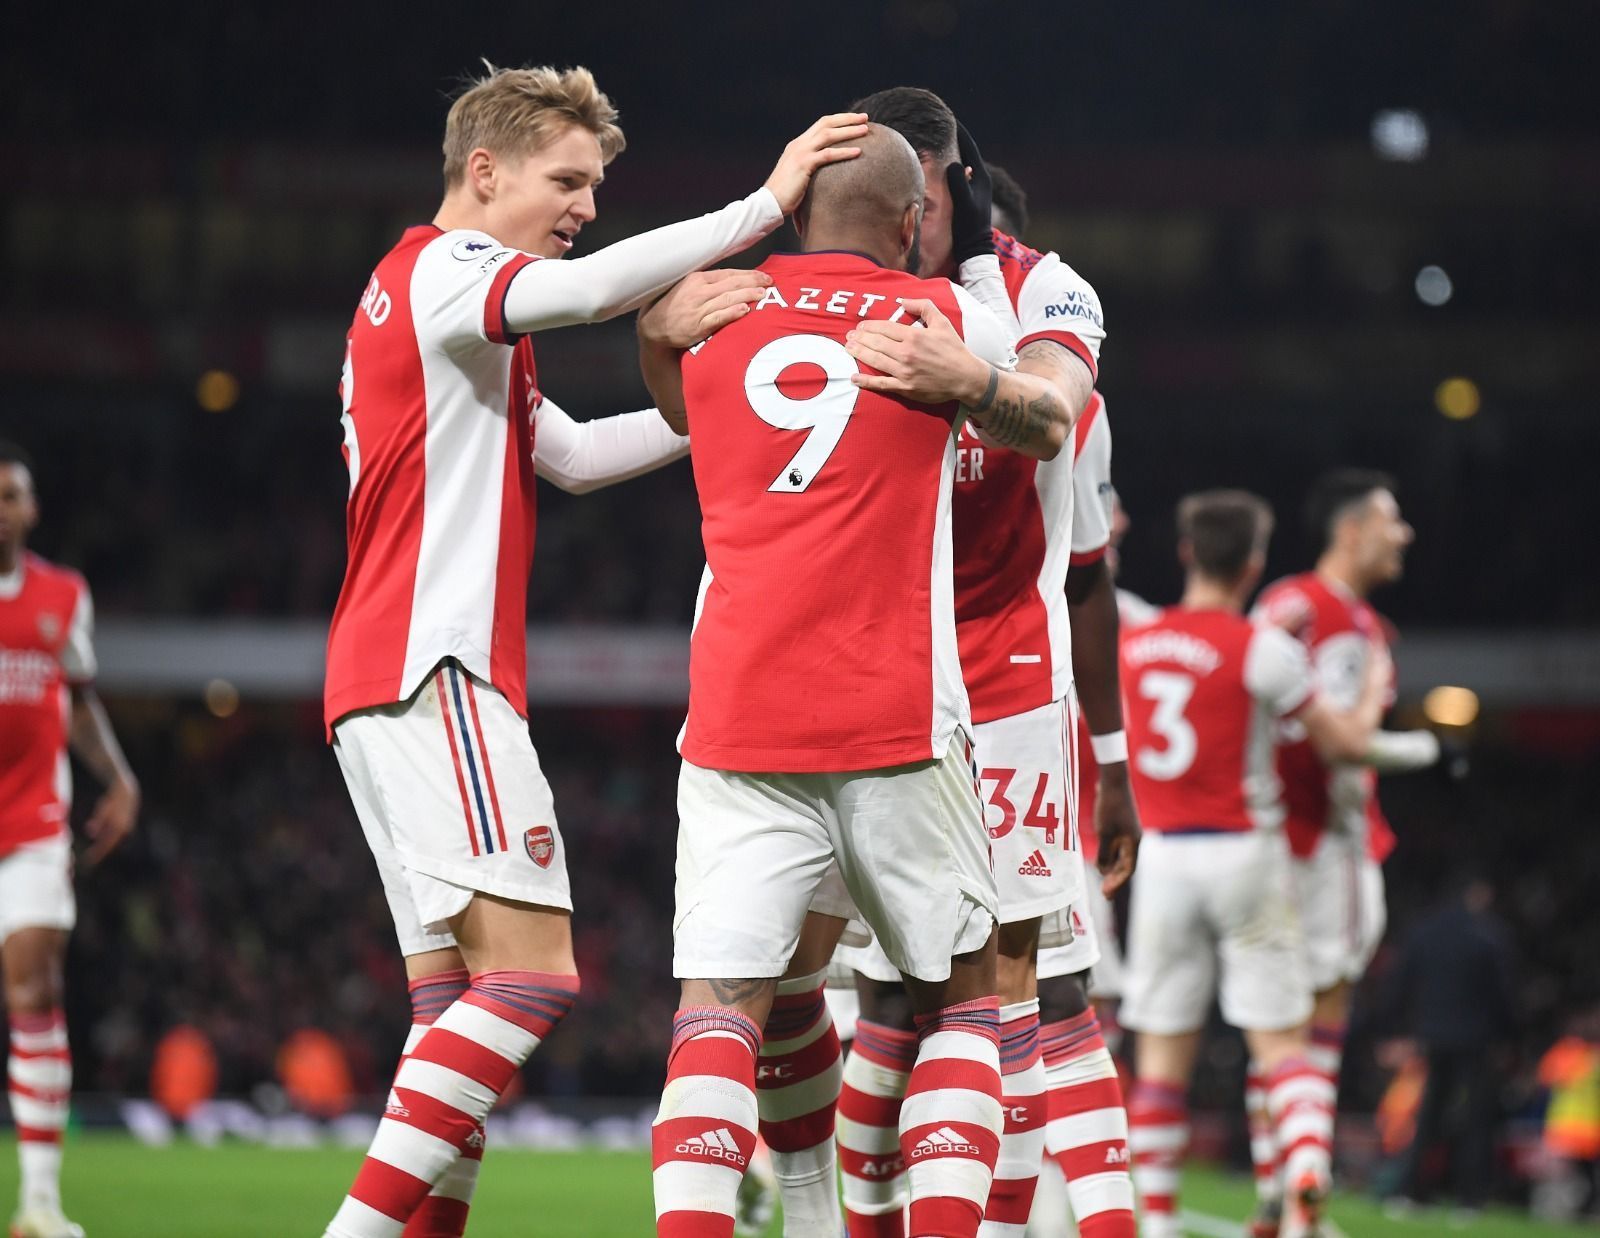 Arsenal recorded a 2-0 win against West Ham in the Premier League.